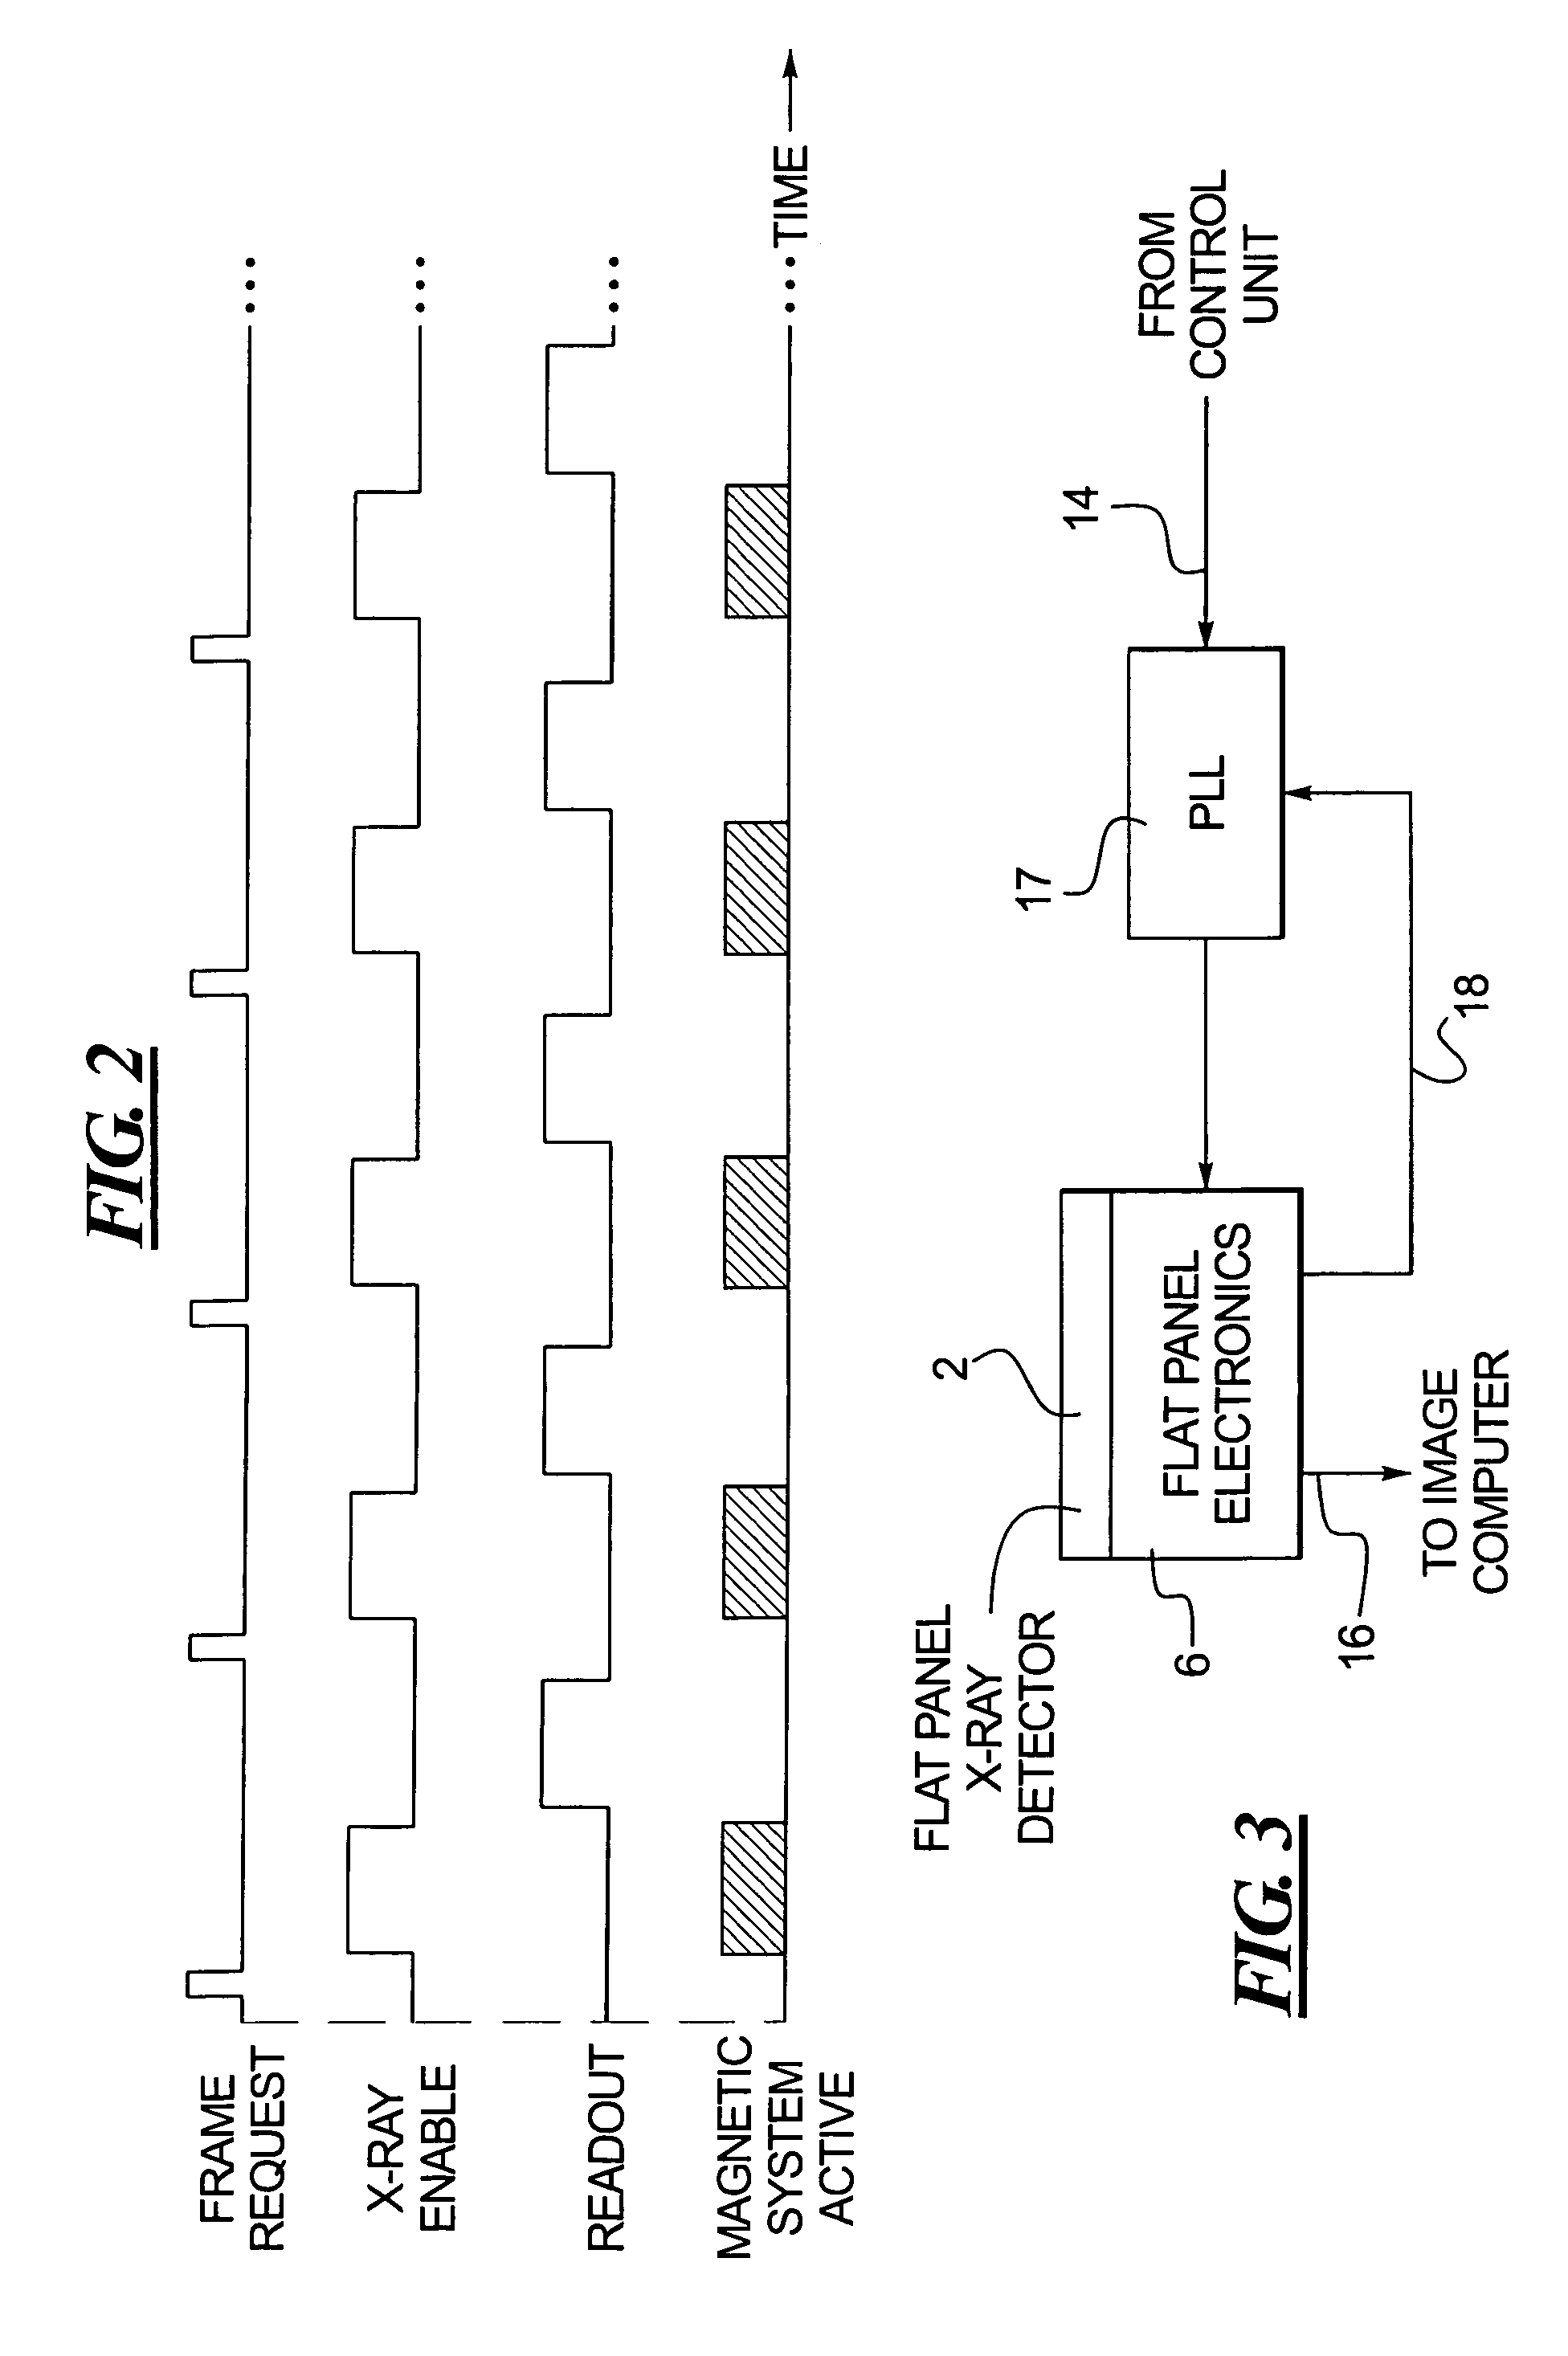 Method and apparatus for synchronizing operation of an x-ray system and a magnetic system